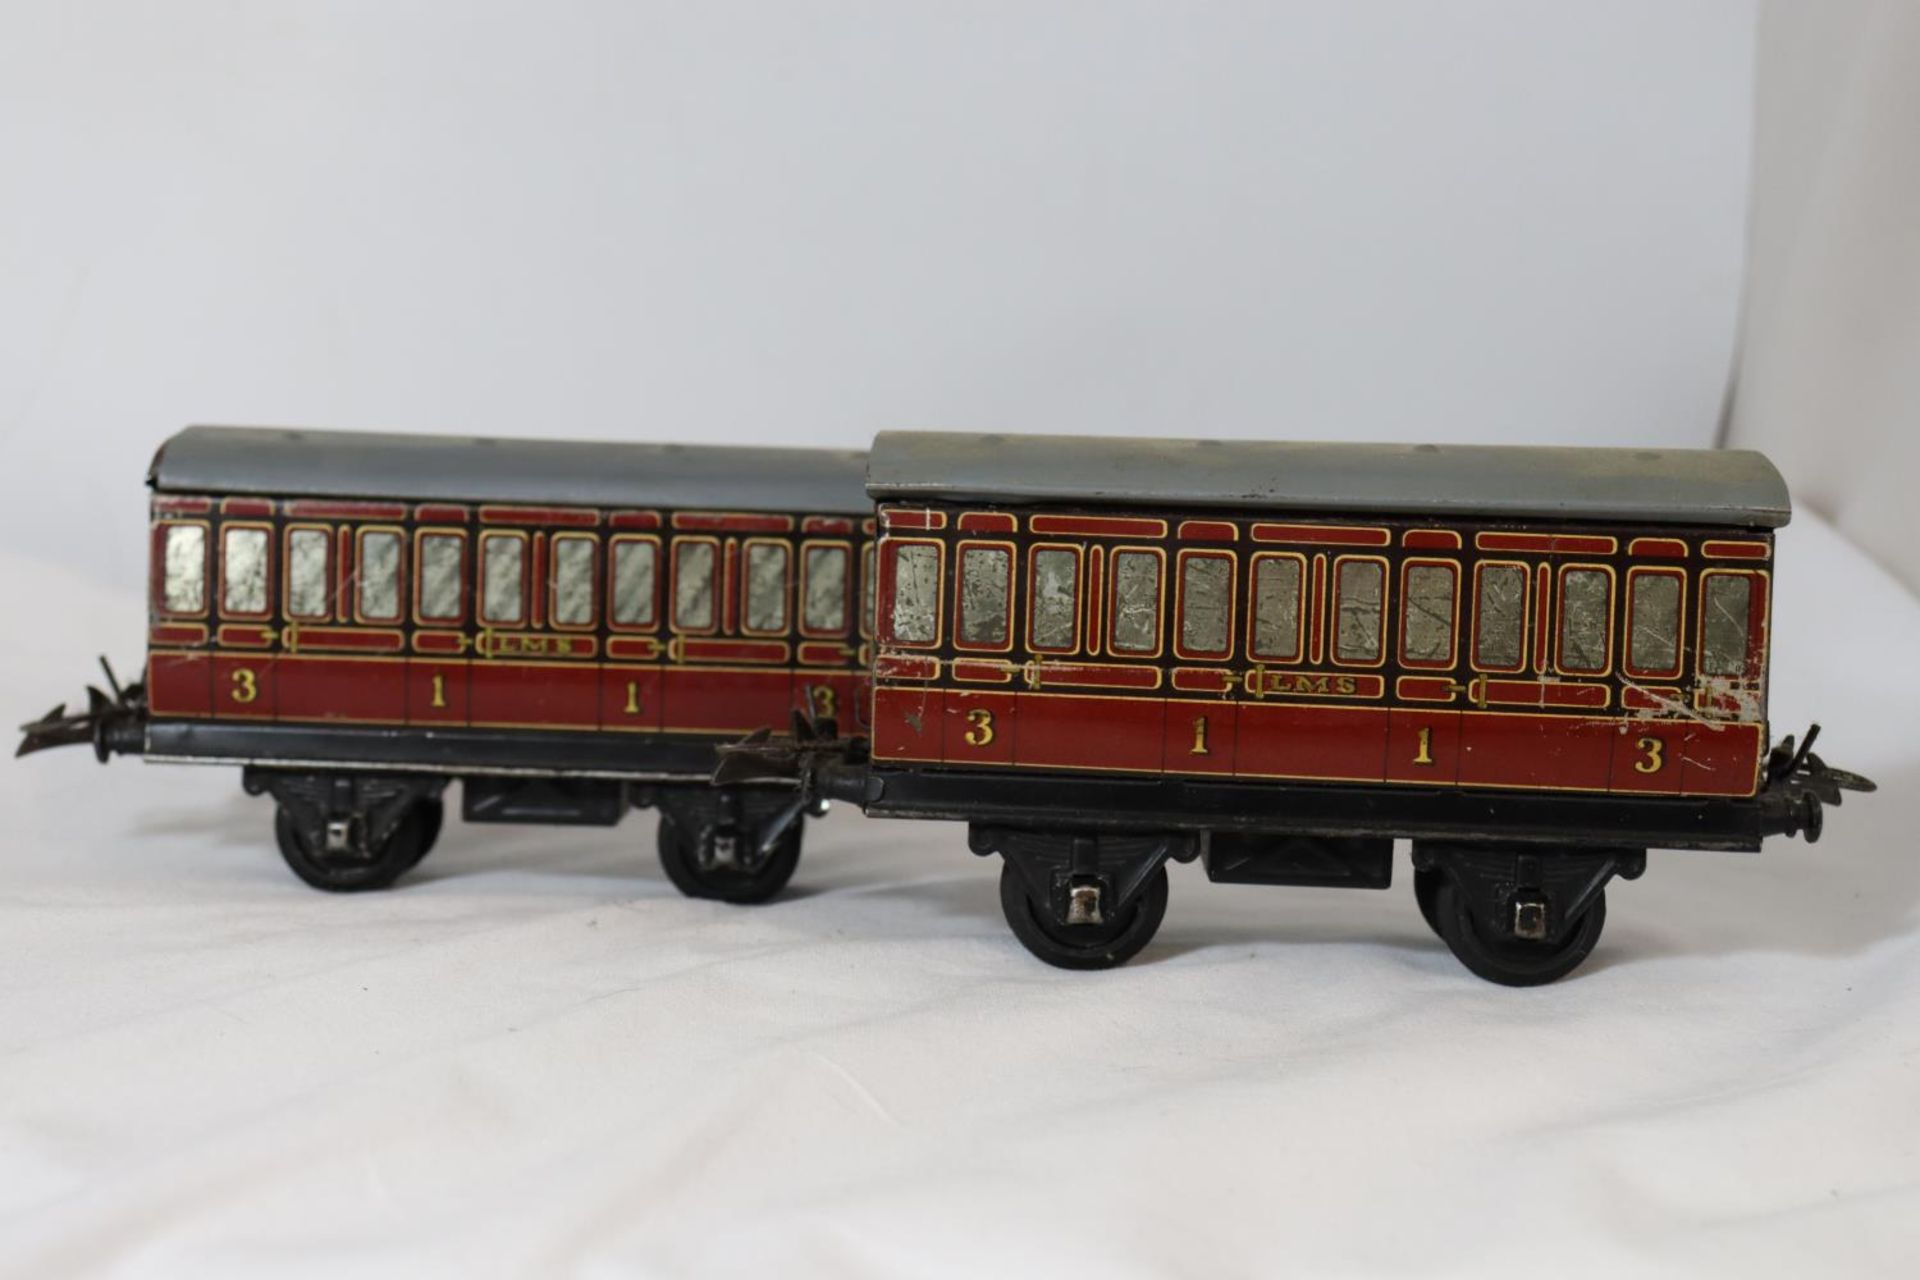 TWO HORNBY .30 GAUGE METAL RAILWAY CARRIAGES LENGTH 17 CM - Image 3 of 5